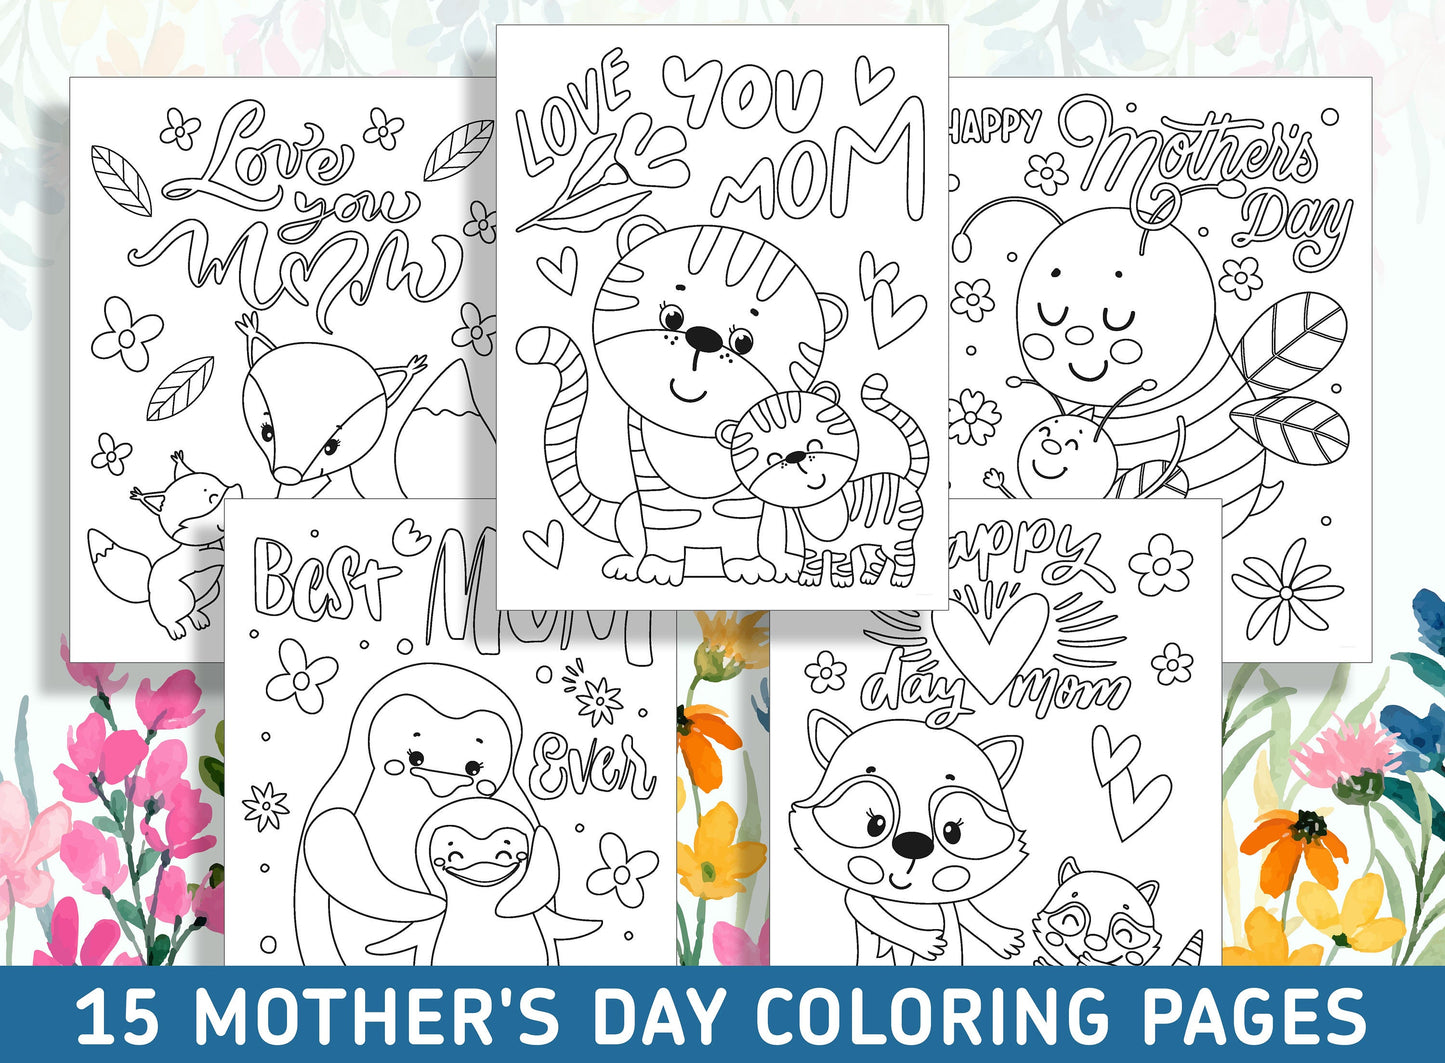 15 Heartwarming Mother's Day Coloring Pages to Show Mom Your Love, PDF File, Instant Download